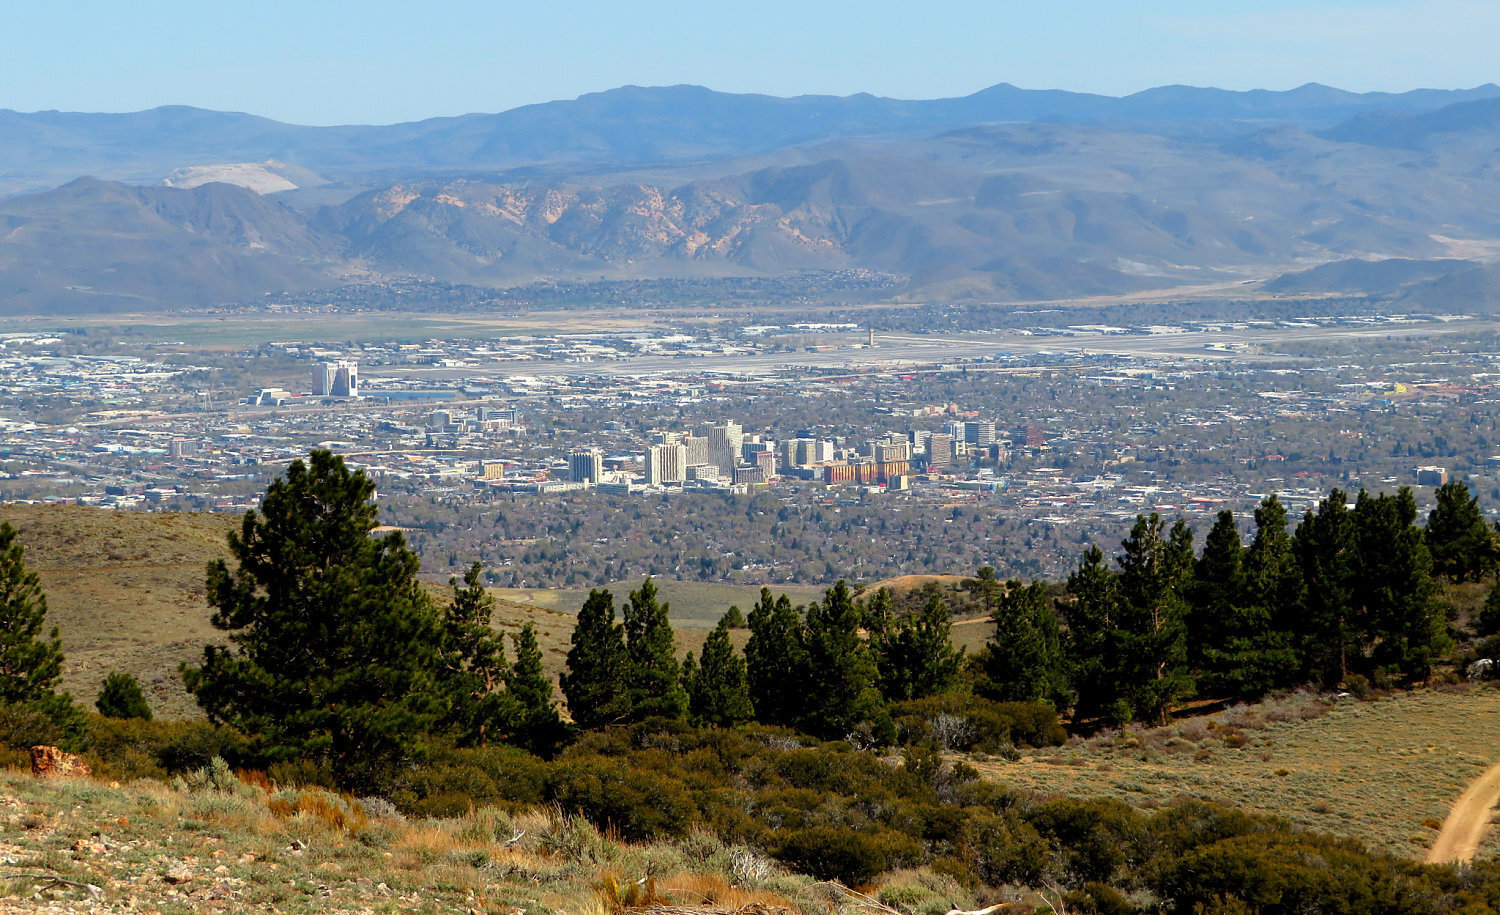 Downtown Reno in the distance from the surrounding Mountains